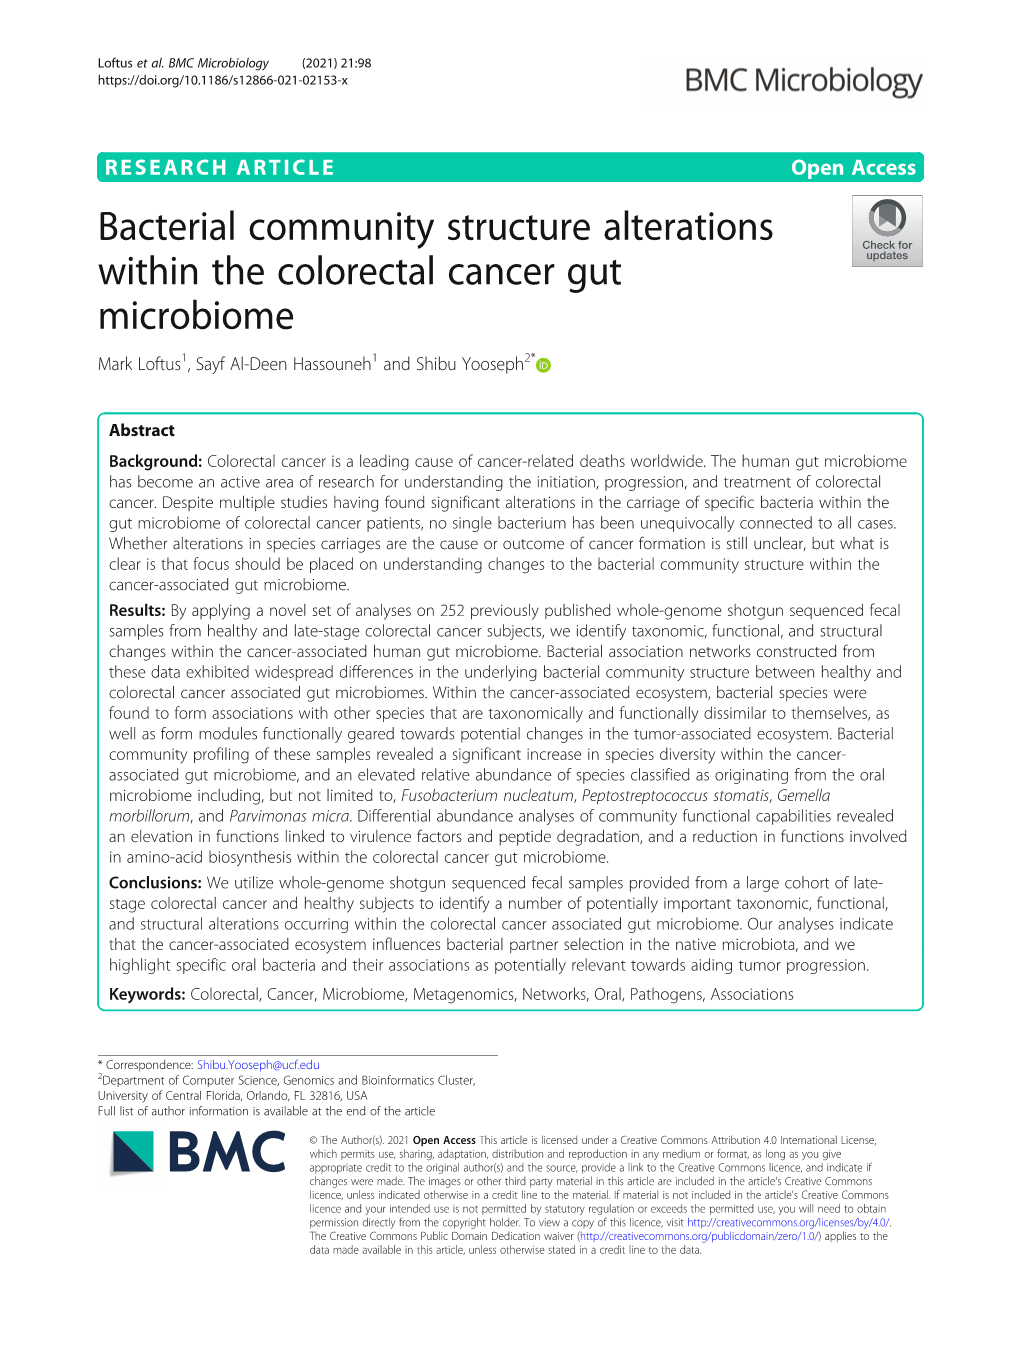 Bacterial Community Structure Alterations Within the Colorectal Cancer Gut Microbiome Mark Loftus1, Sayf Al-Deen Hassouneh1 and Shibu Yooseph2*